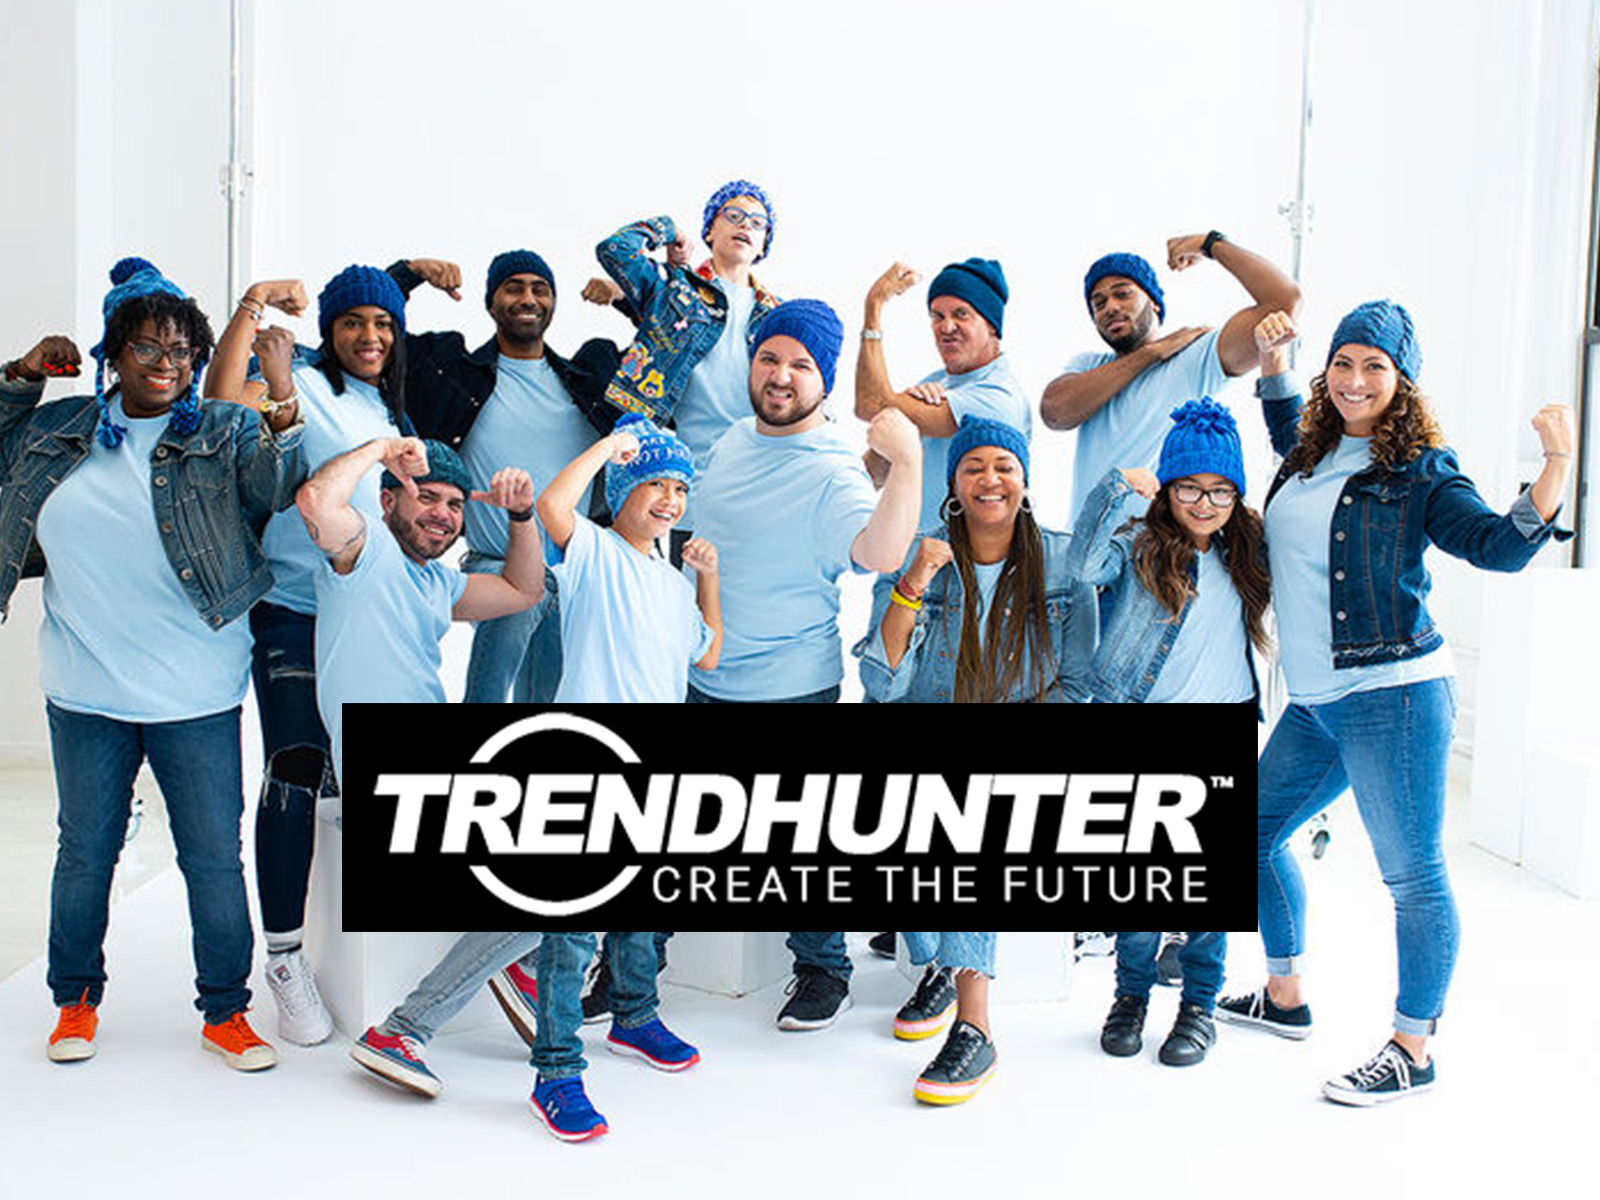 Trendhunter logo overlaid on image of shira and friends in blue hats